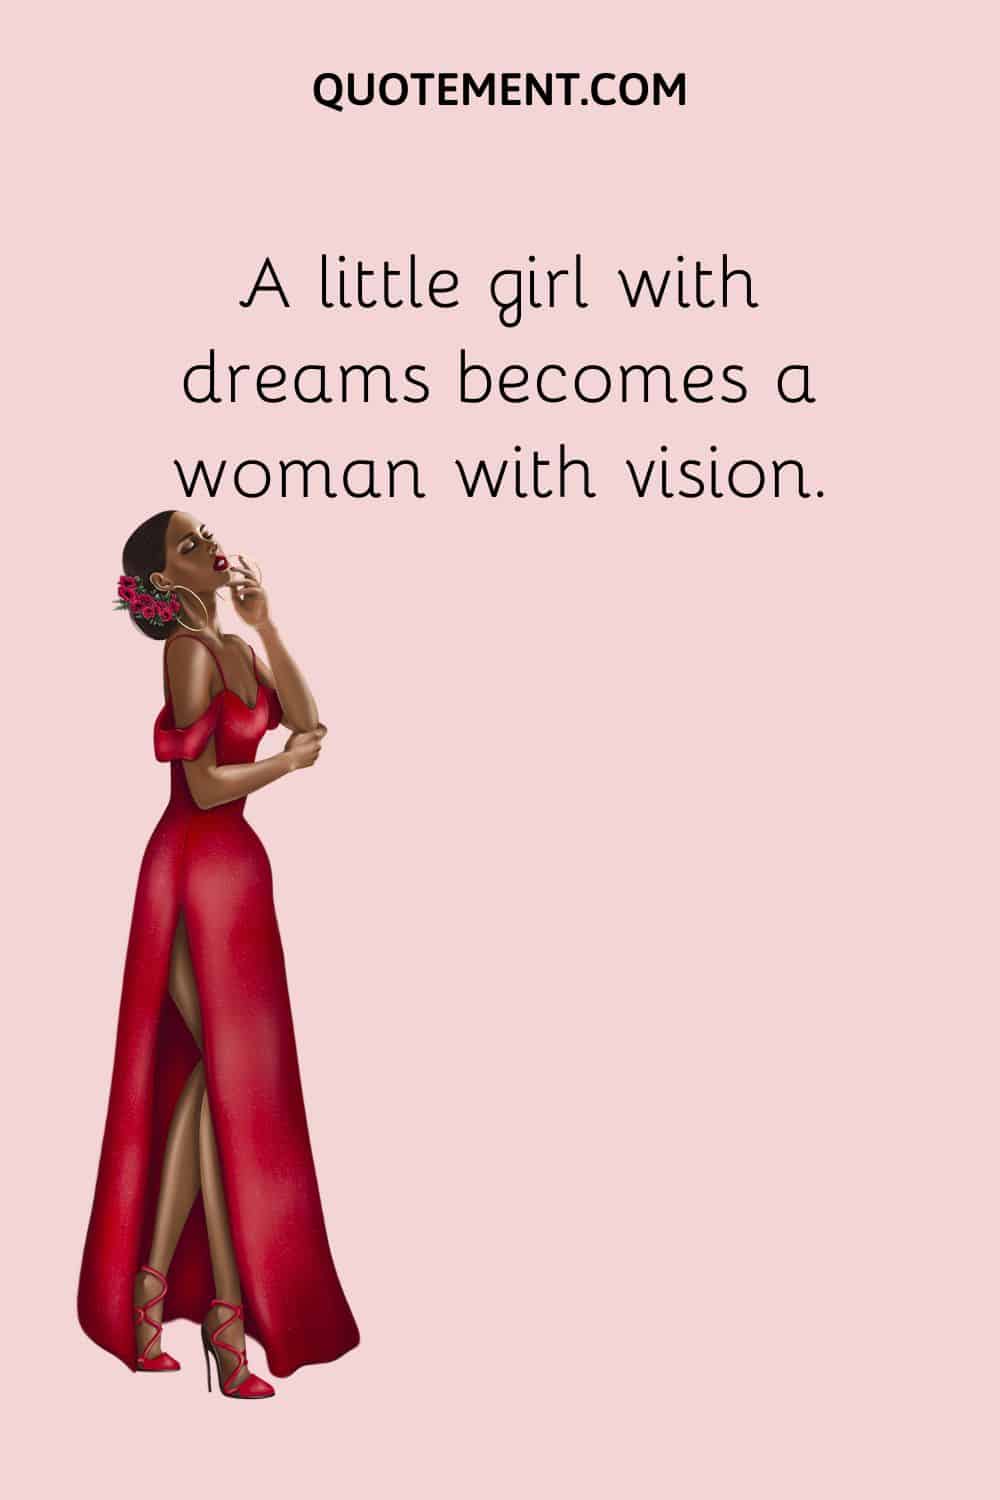 A little girl with dreams becomes a woman with vision